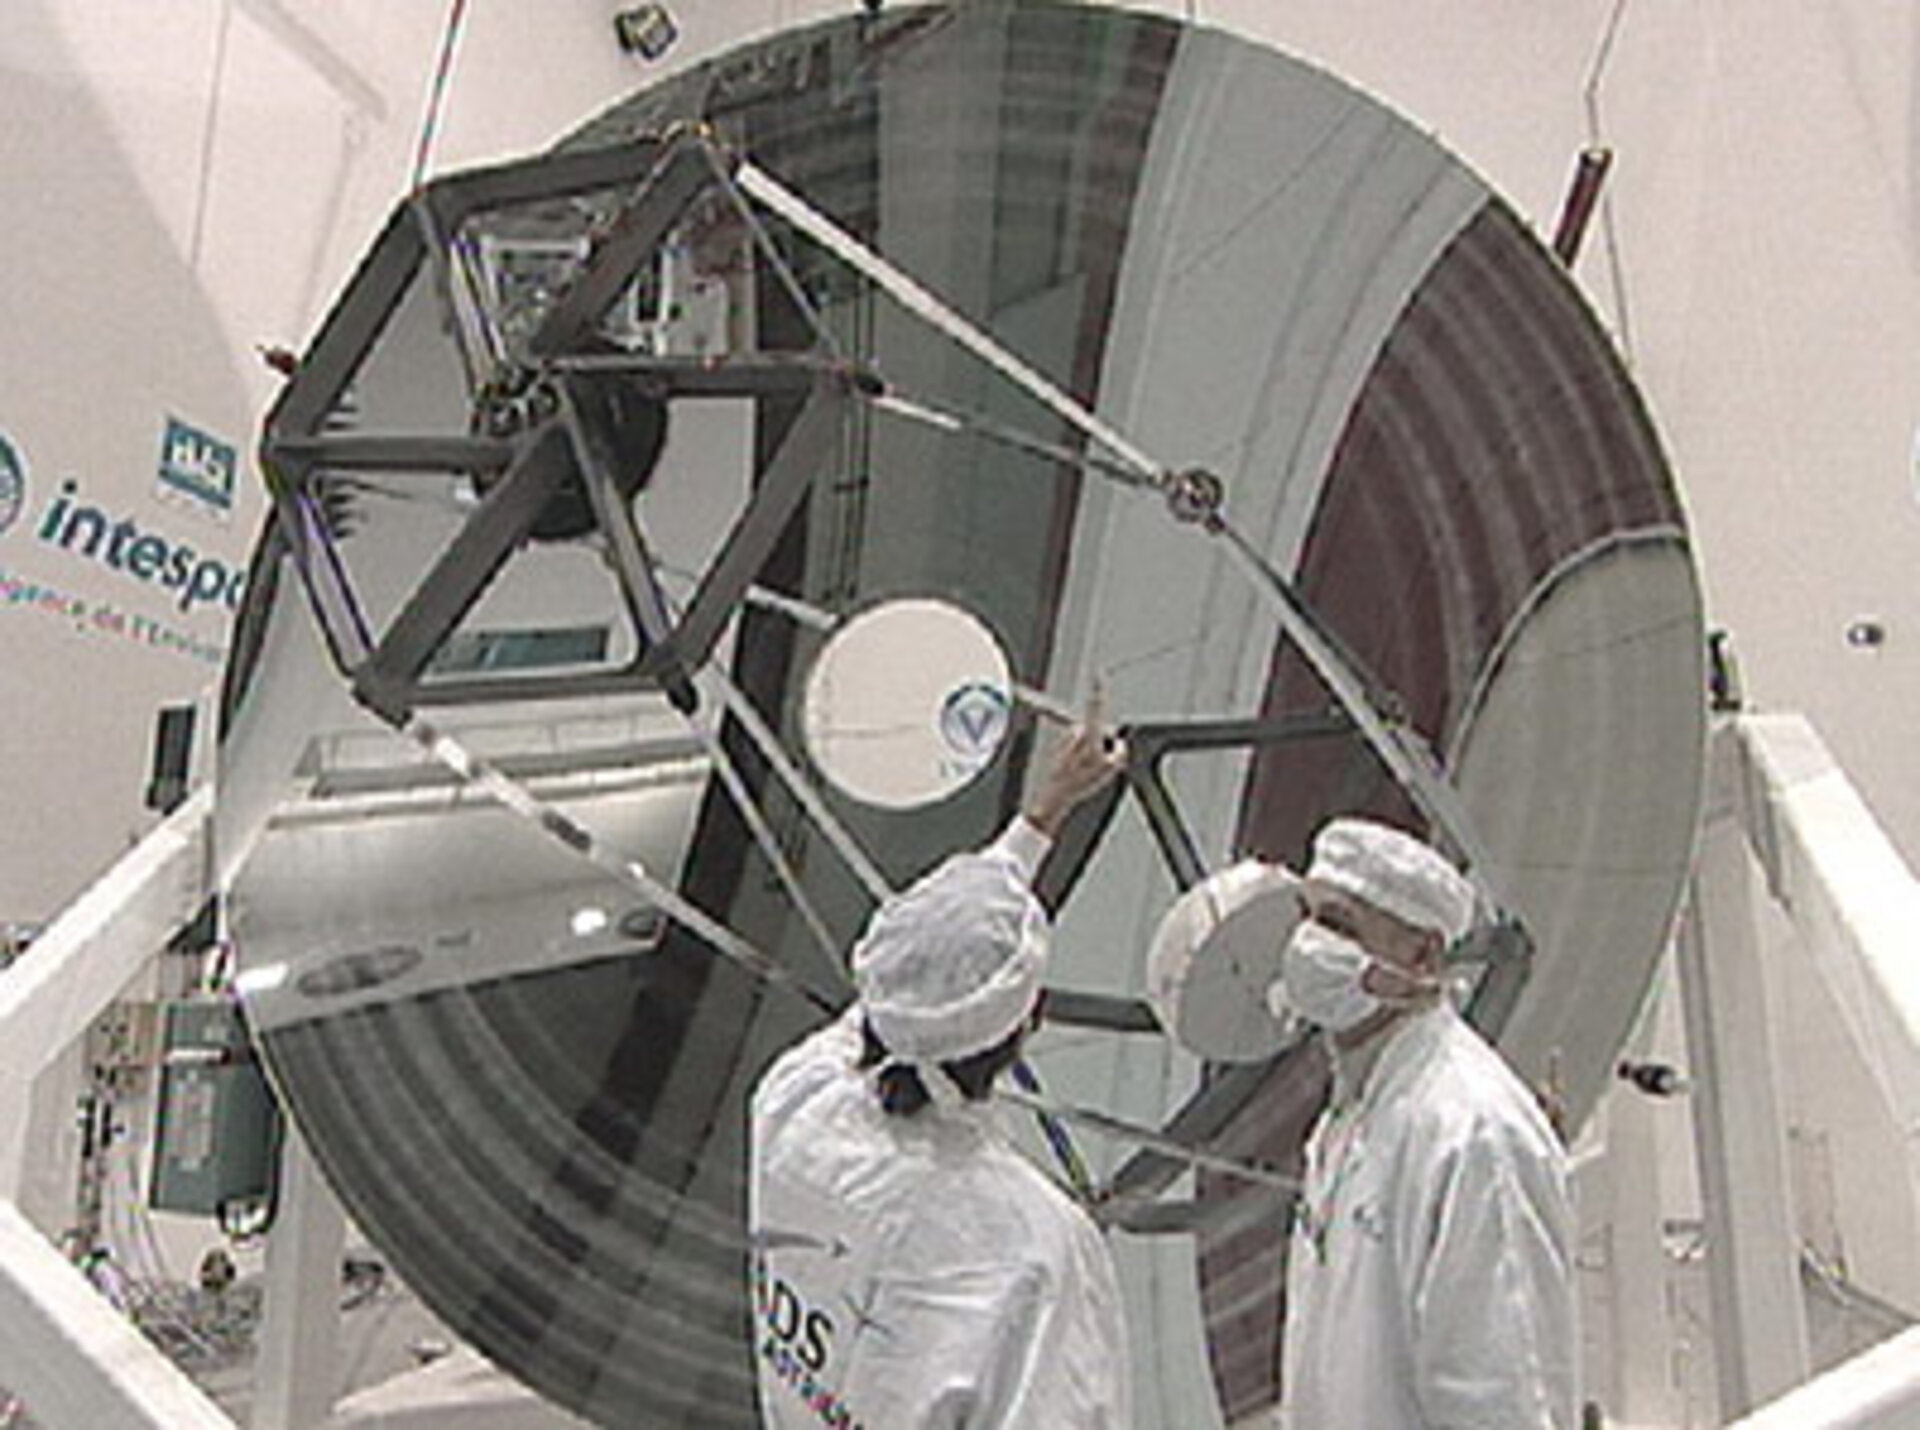 The Herschel telescope with its 3.5m  diameter primary mirror being tested at the Intespace facility in Toulouse